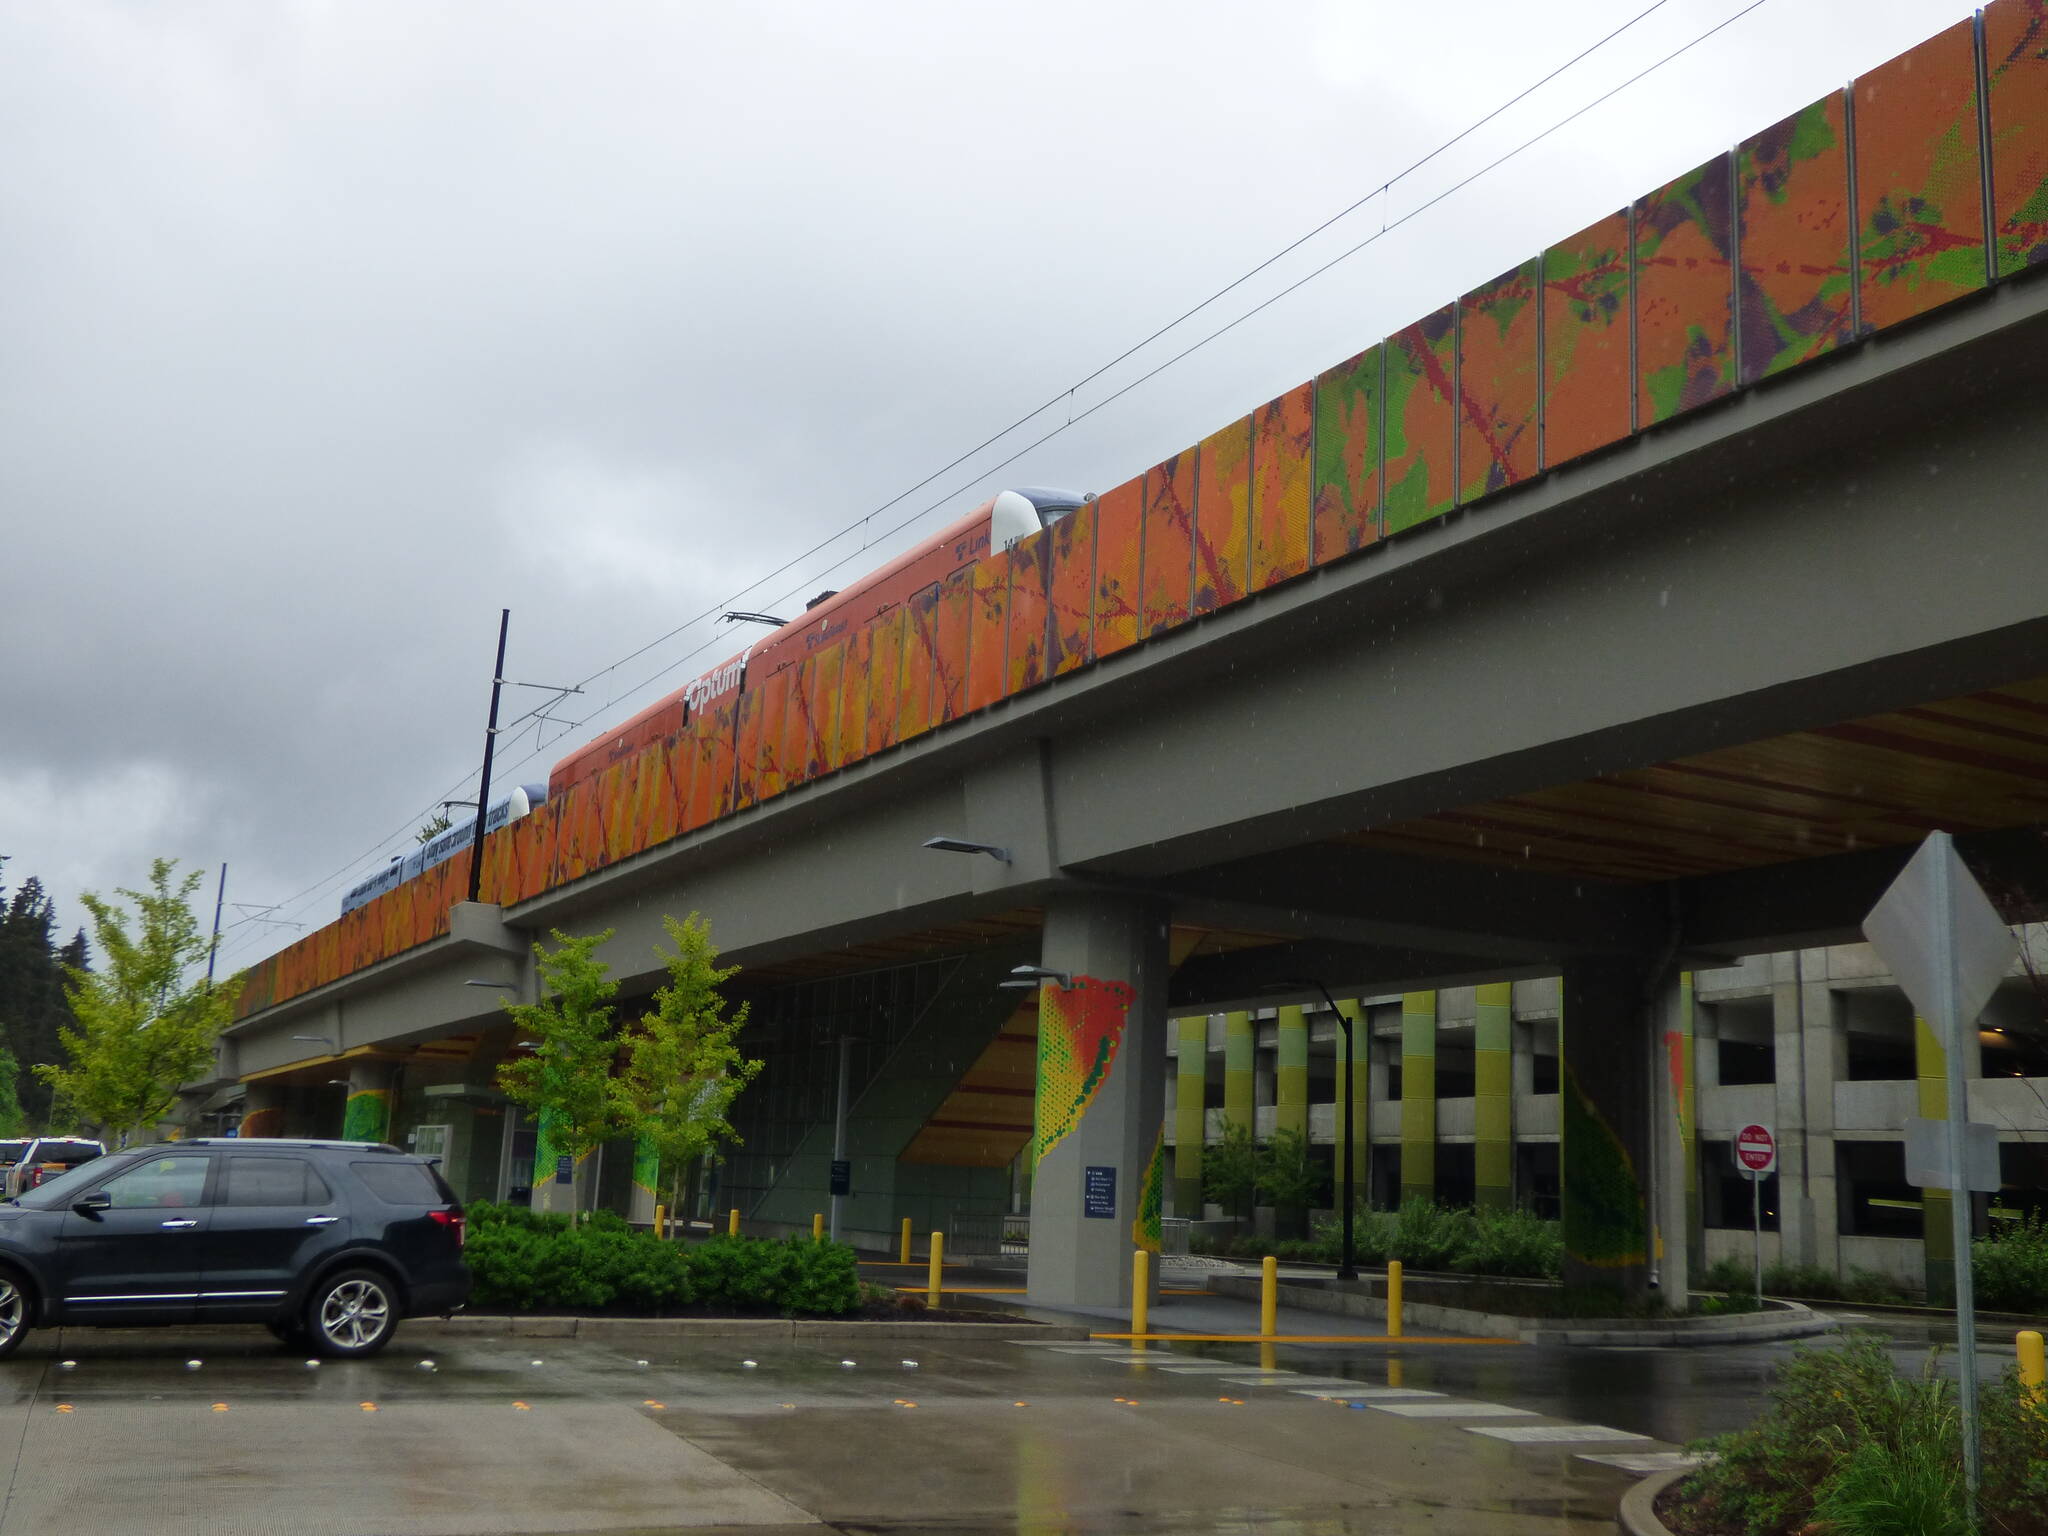 South Bellevue Station. Mural depicting the seasonal colors of the Mercer Slough by artist Vicki Scuri. (Cameron Sires/Sound Publishing)